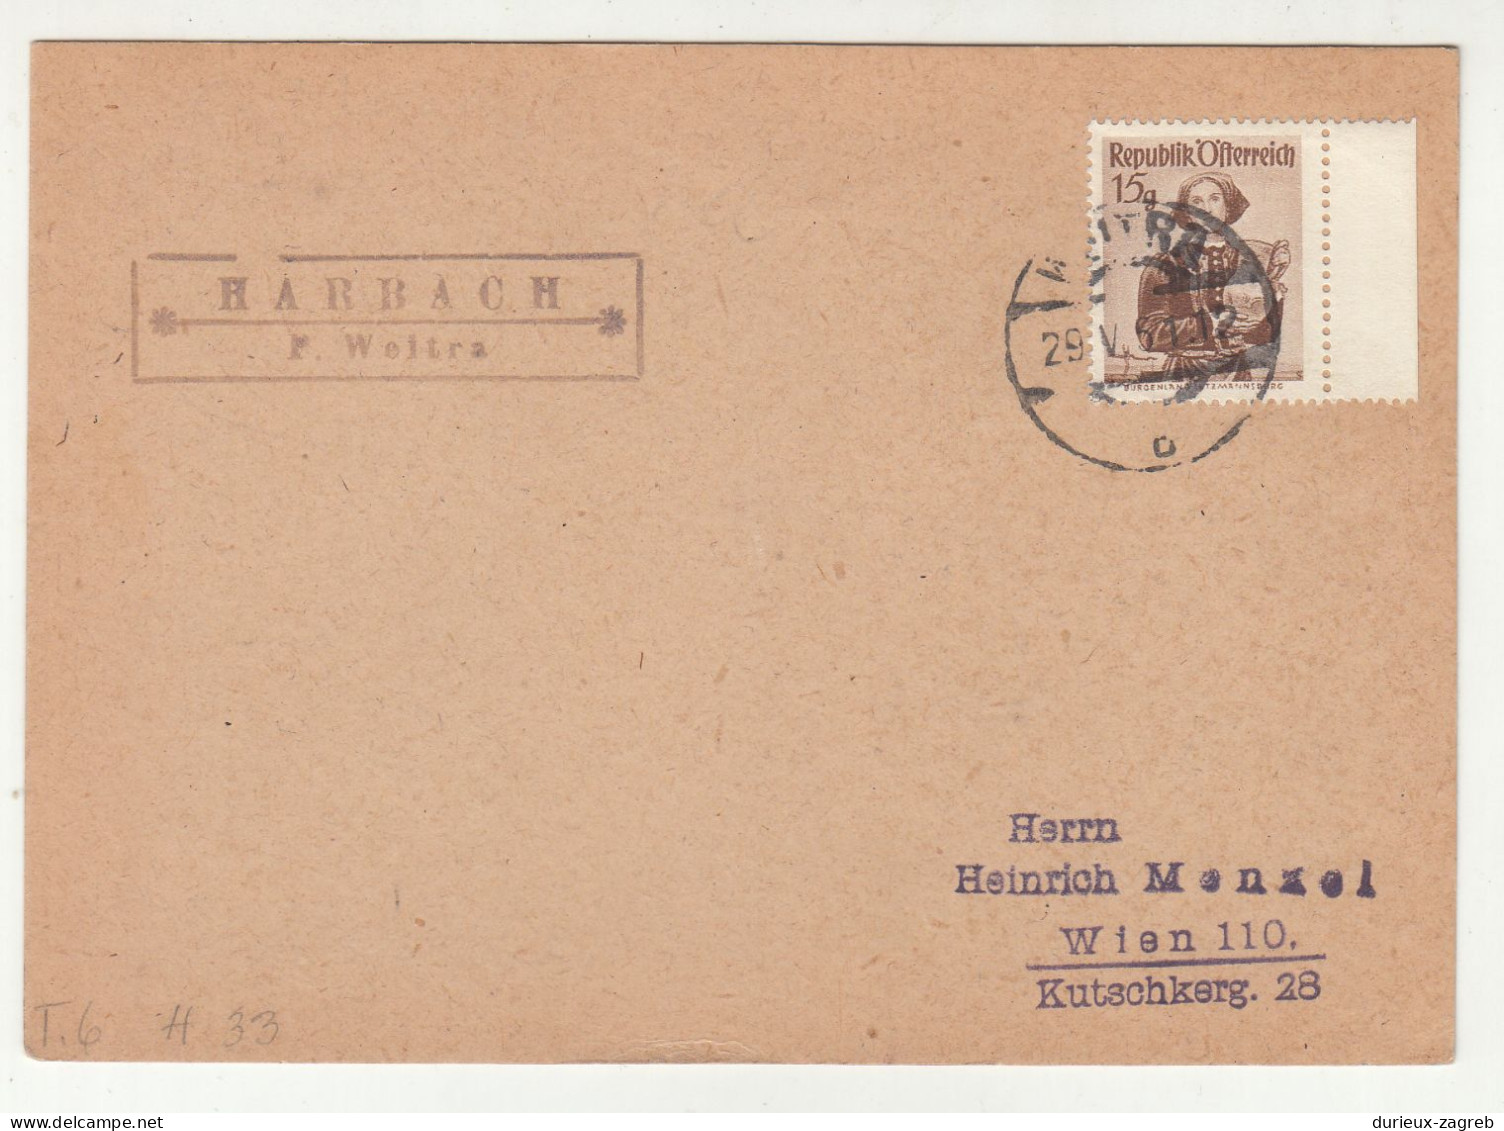 Harbach P. Weitra Mark On Card Posted? 1961 B240401 - Lettres & Documents